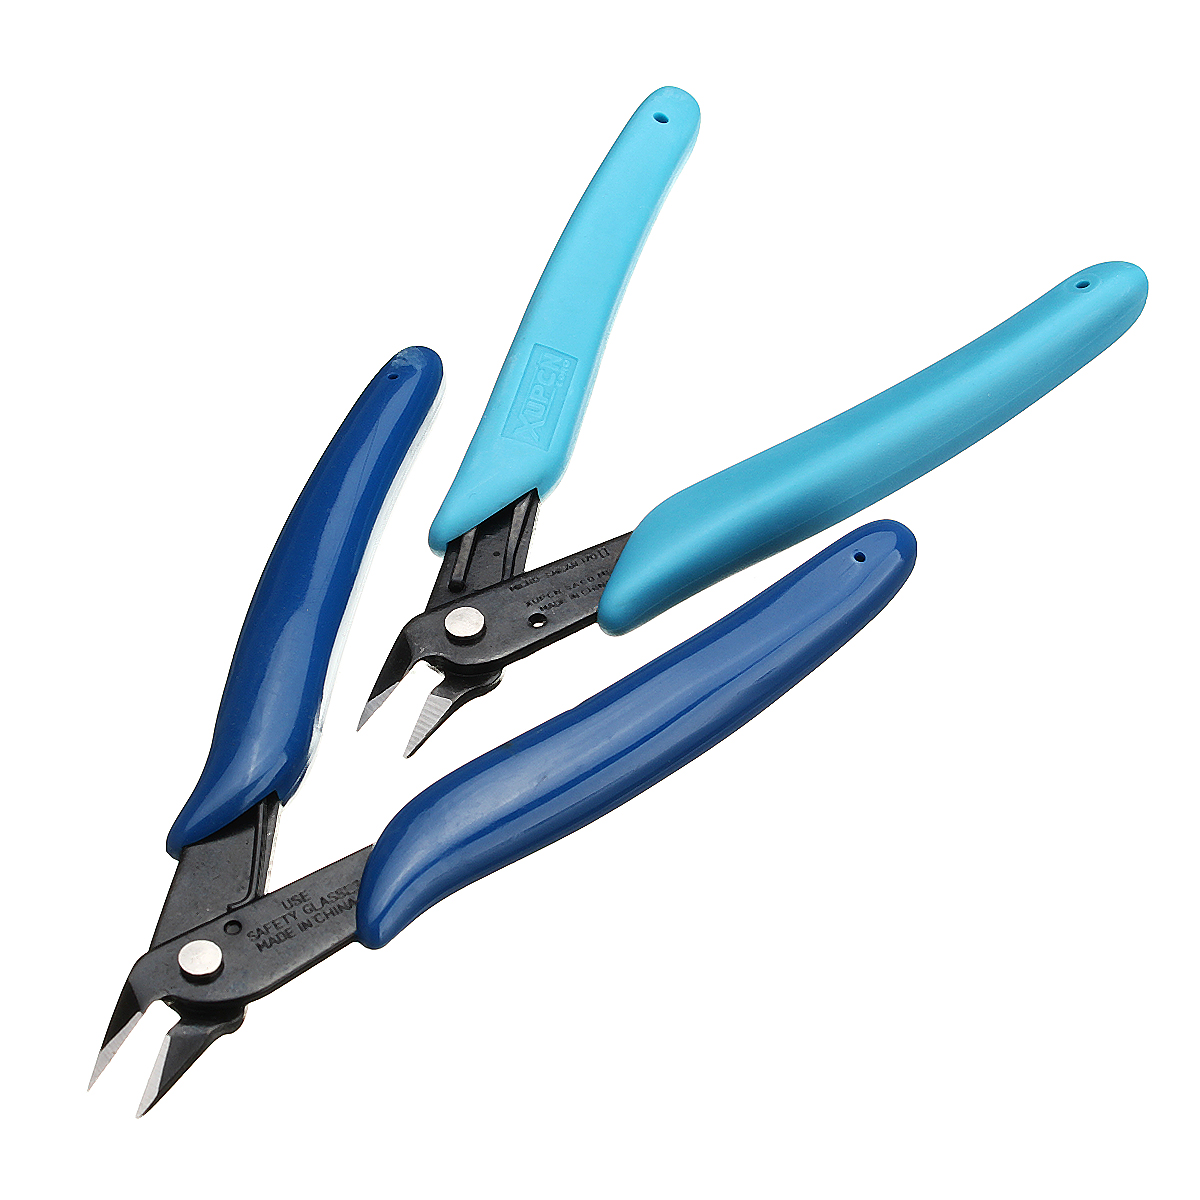 Pliers-Nipper-H-Practical-Electrical-Wire-Cable-Cutter-Cutting-Side-Snips-Flush-Pliers-Mini-Pliers-1371806-6